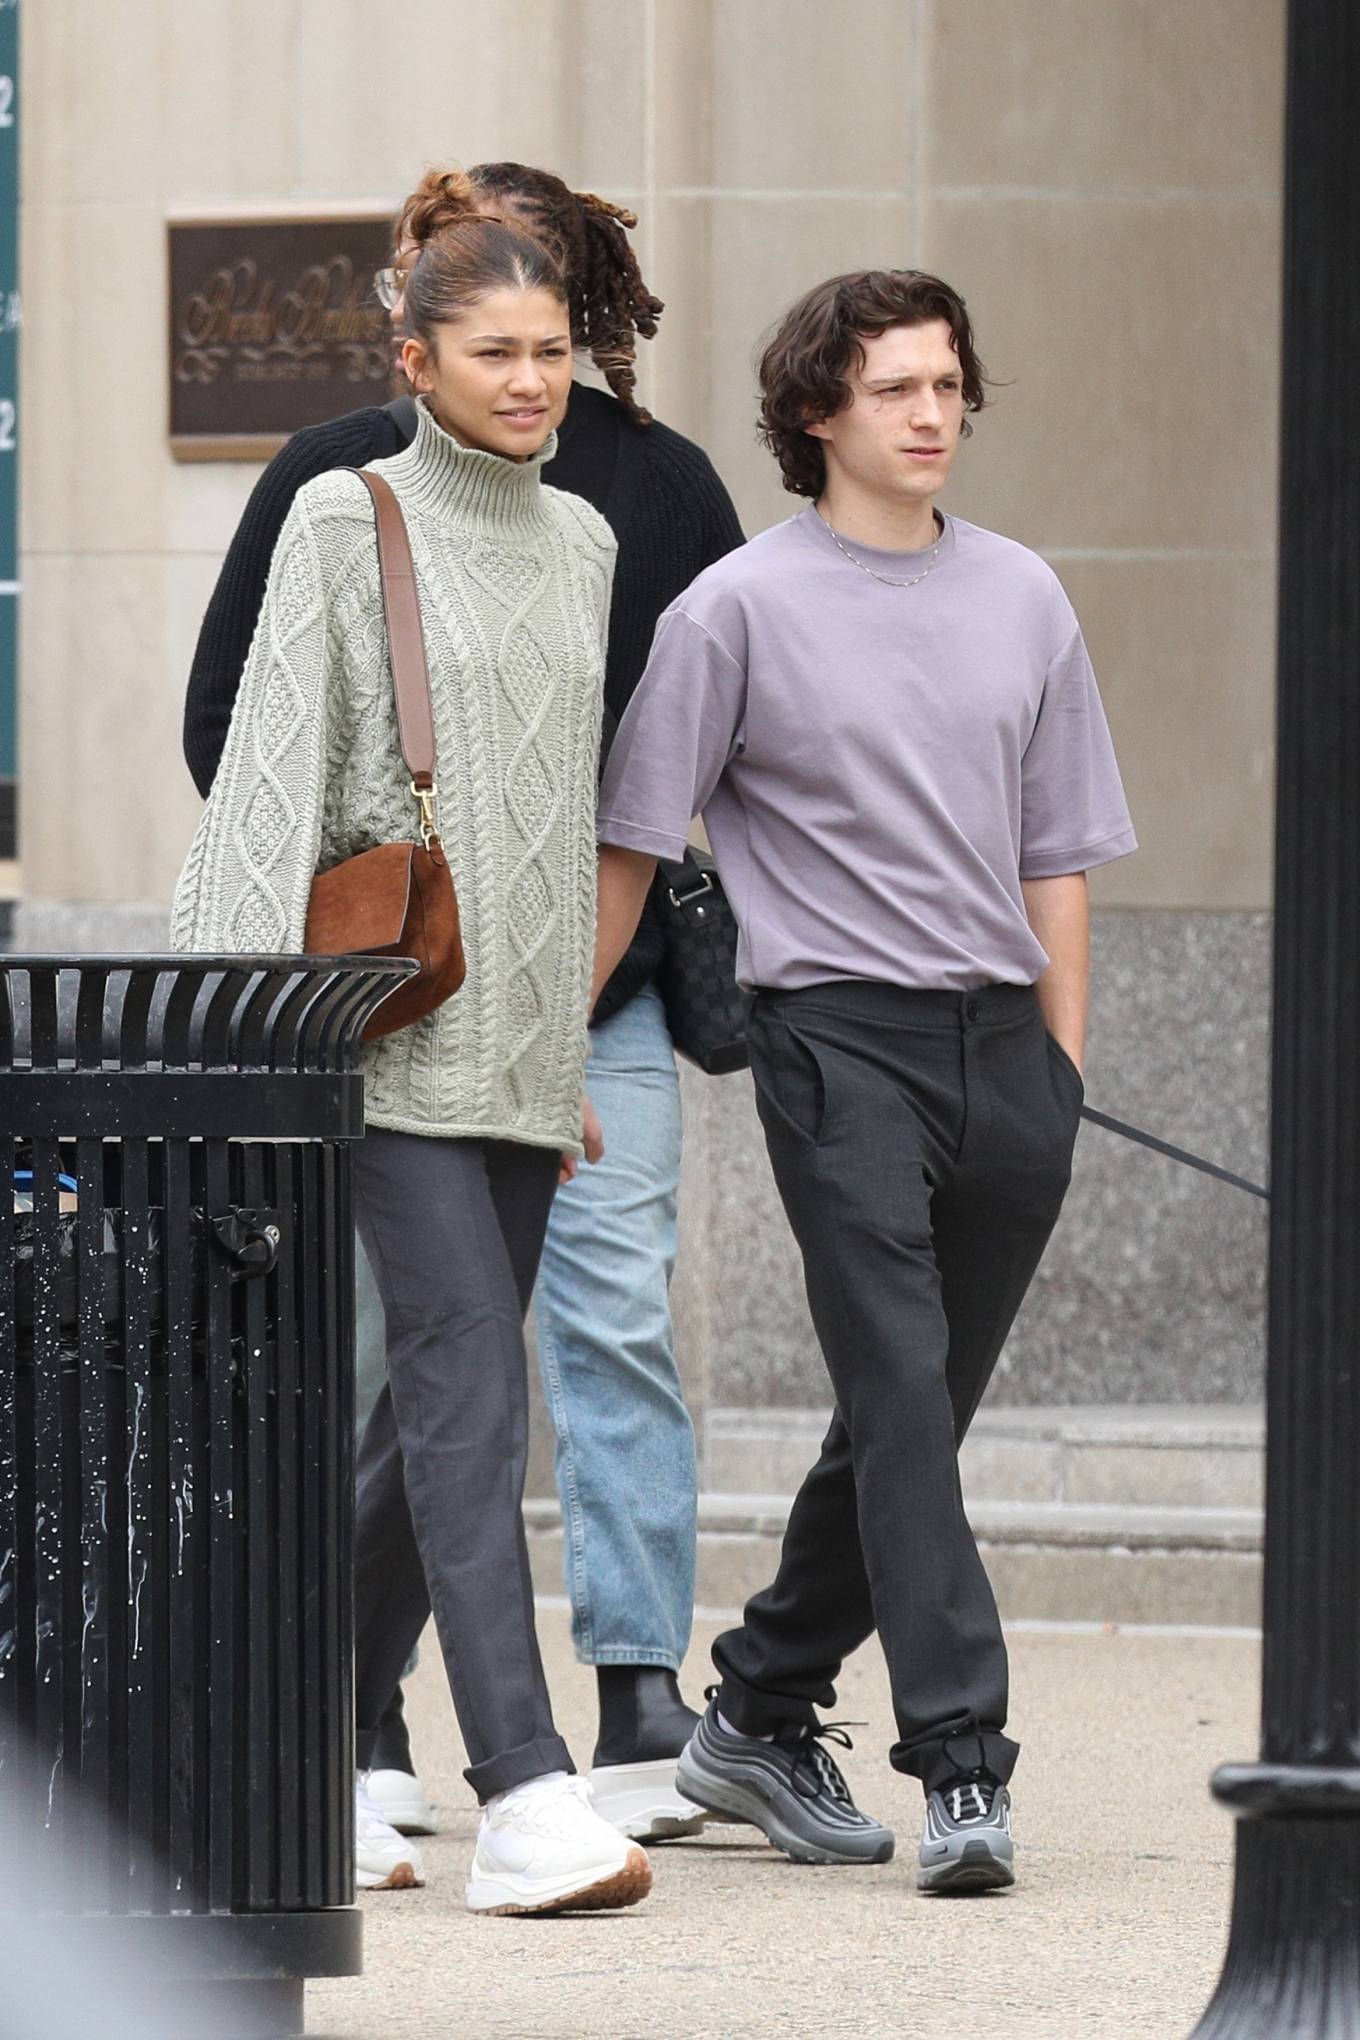 Zendaya Coleman - With Tom Holland hold hands in Boston